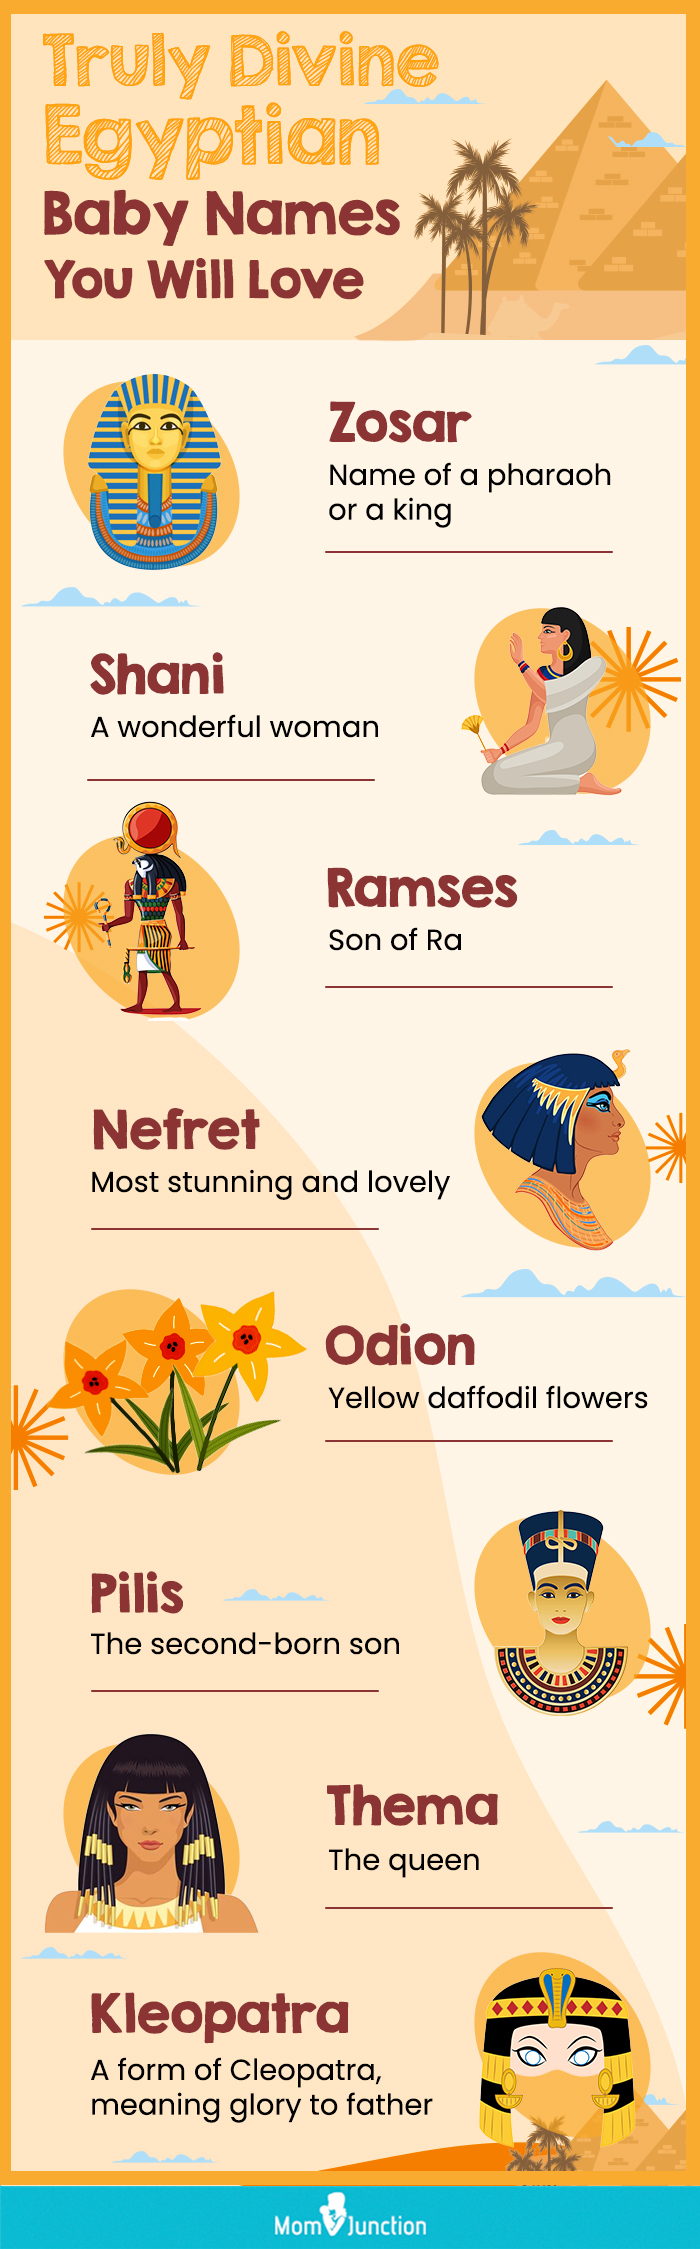 truly divine egyptian baby names you will love (infographic)